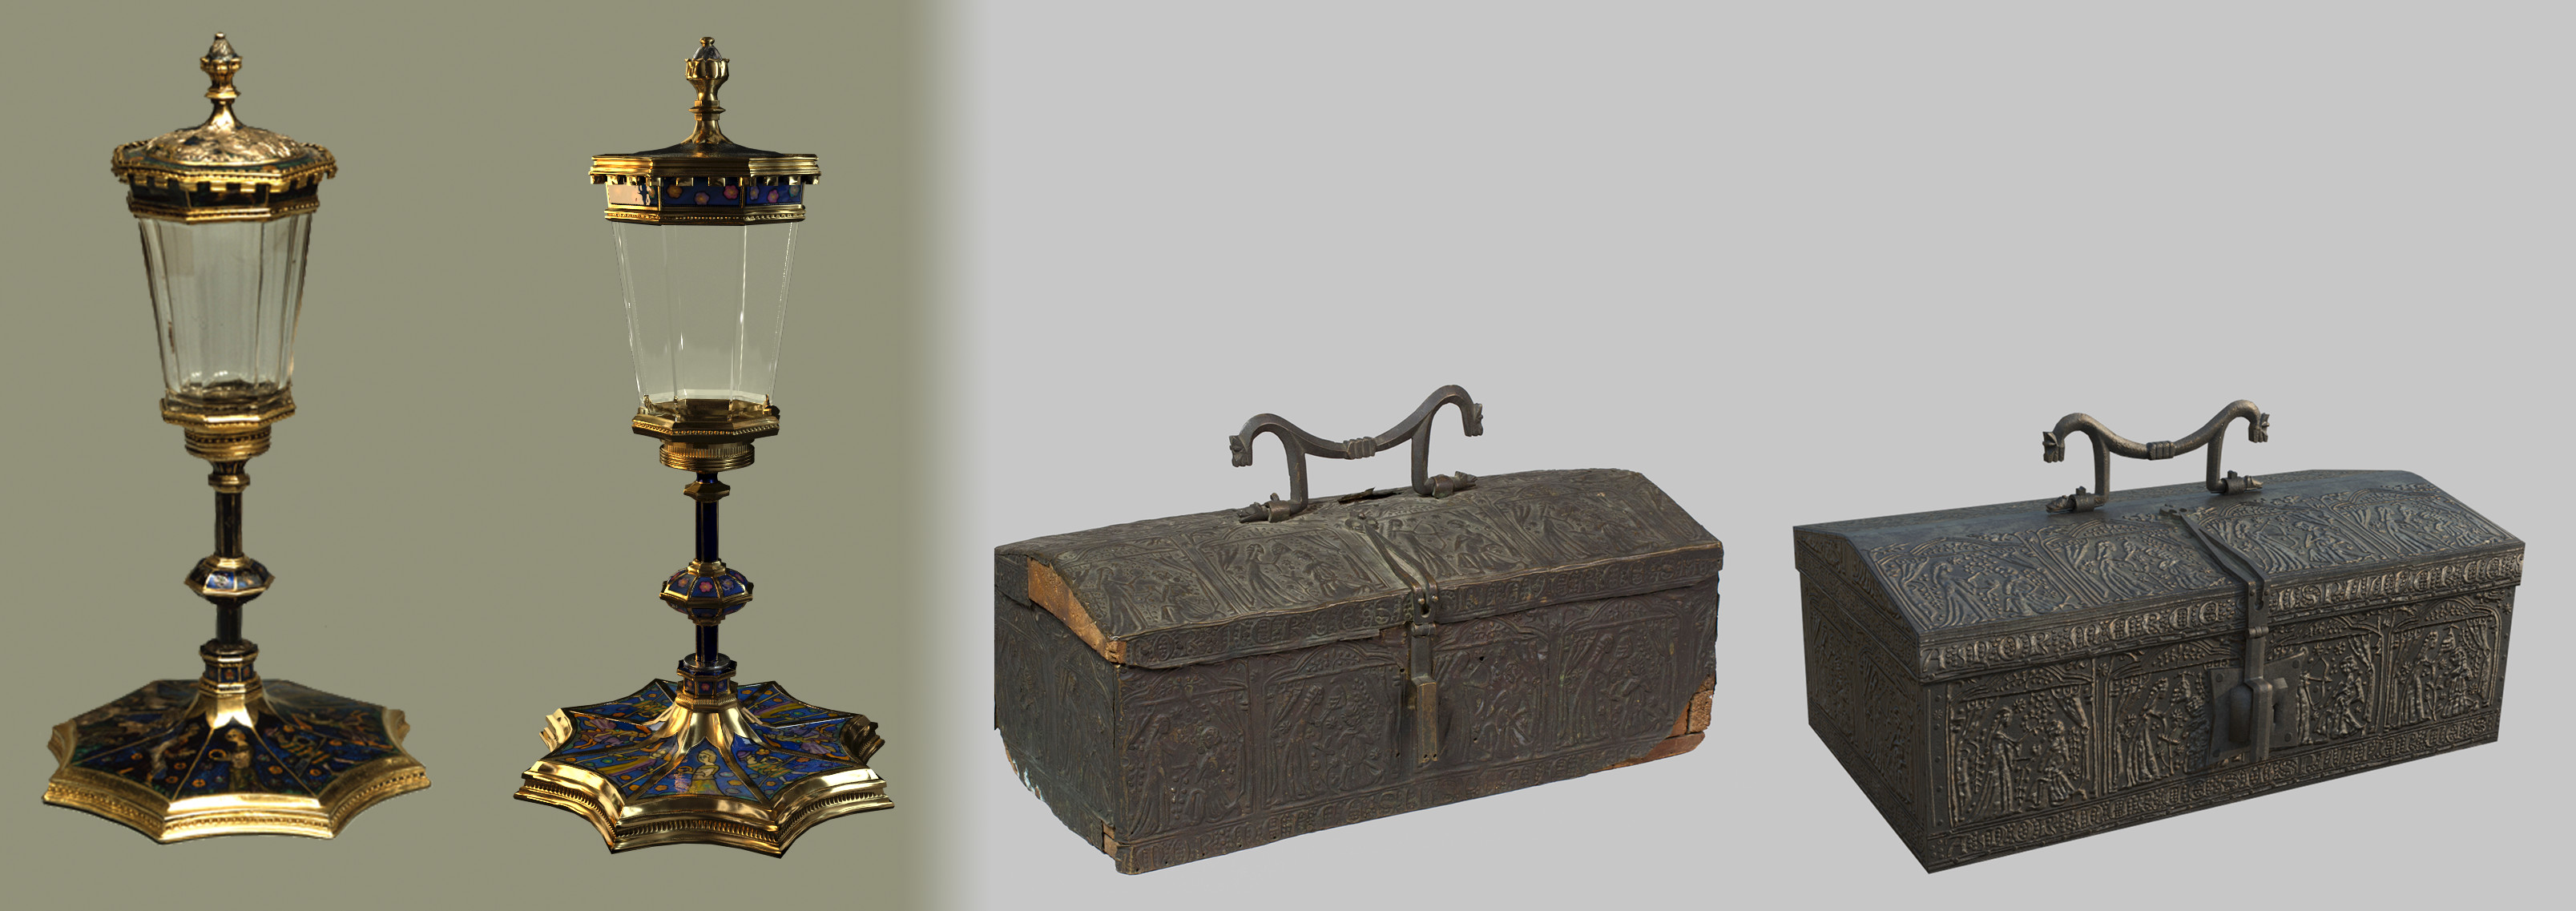 Both medieval objects with their reference. In the case of the metal-chest, damaged areas were "repaired" according to reference and techniques of the time. 